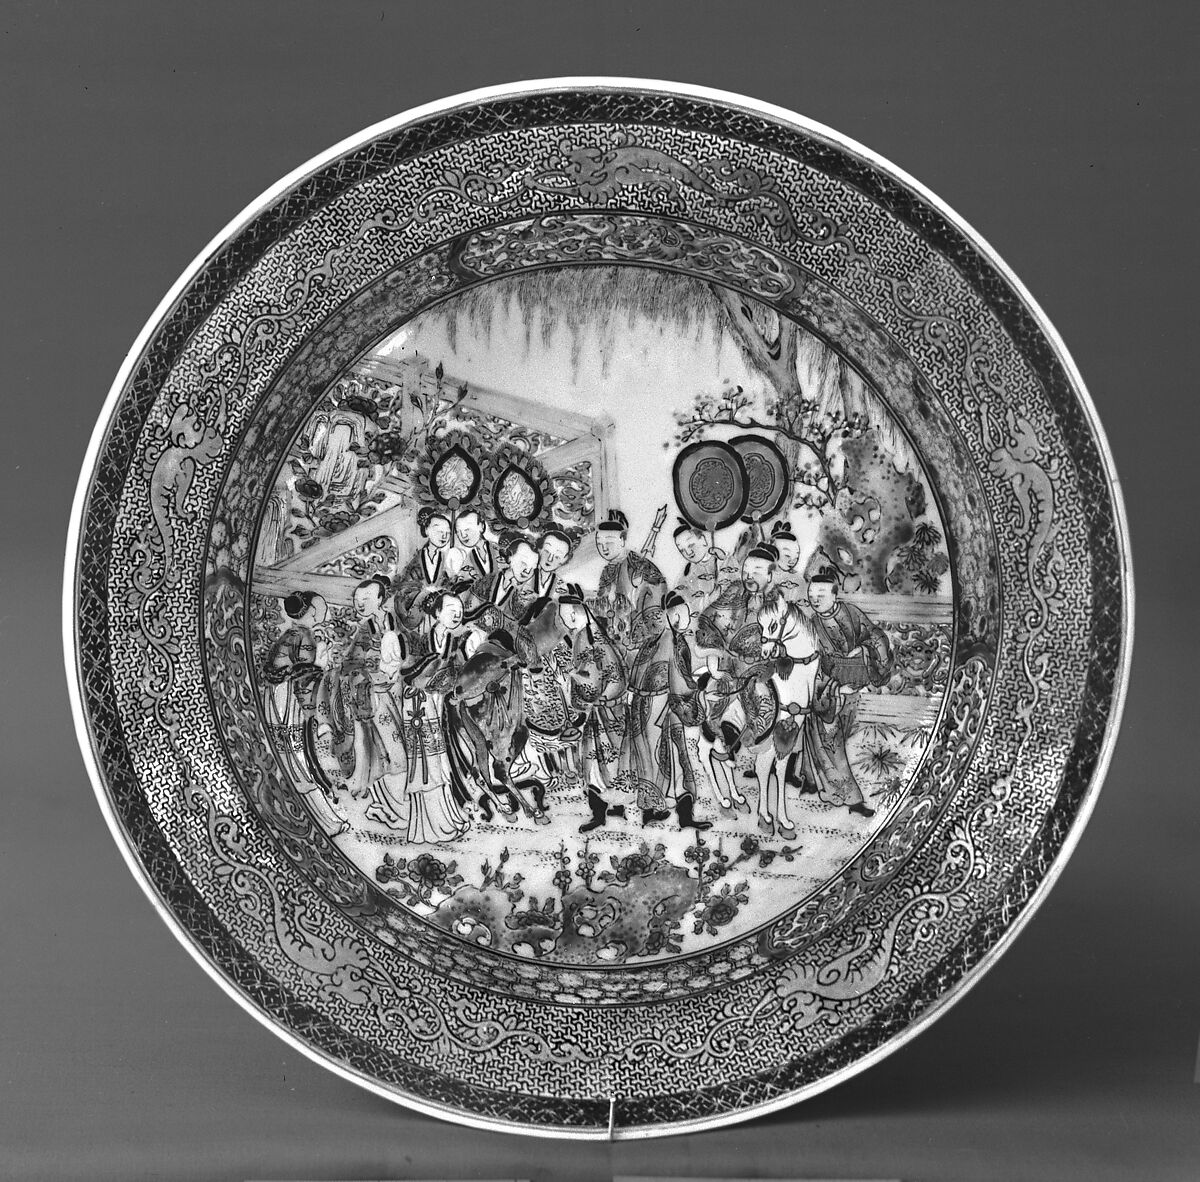 Plate with a narrative scene of the Consort Yang, Porcelain painted in overglaze polychrome enamels (Jingdezhen ware), China 